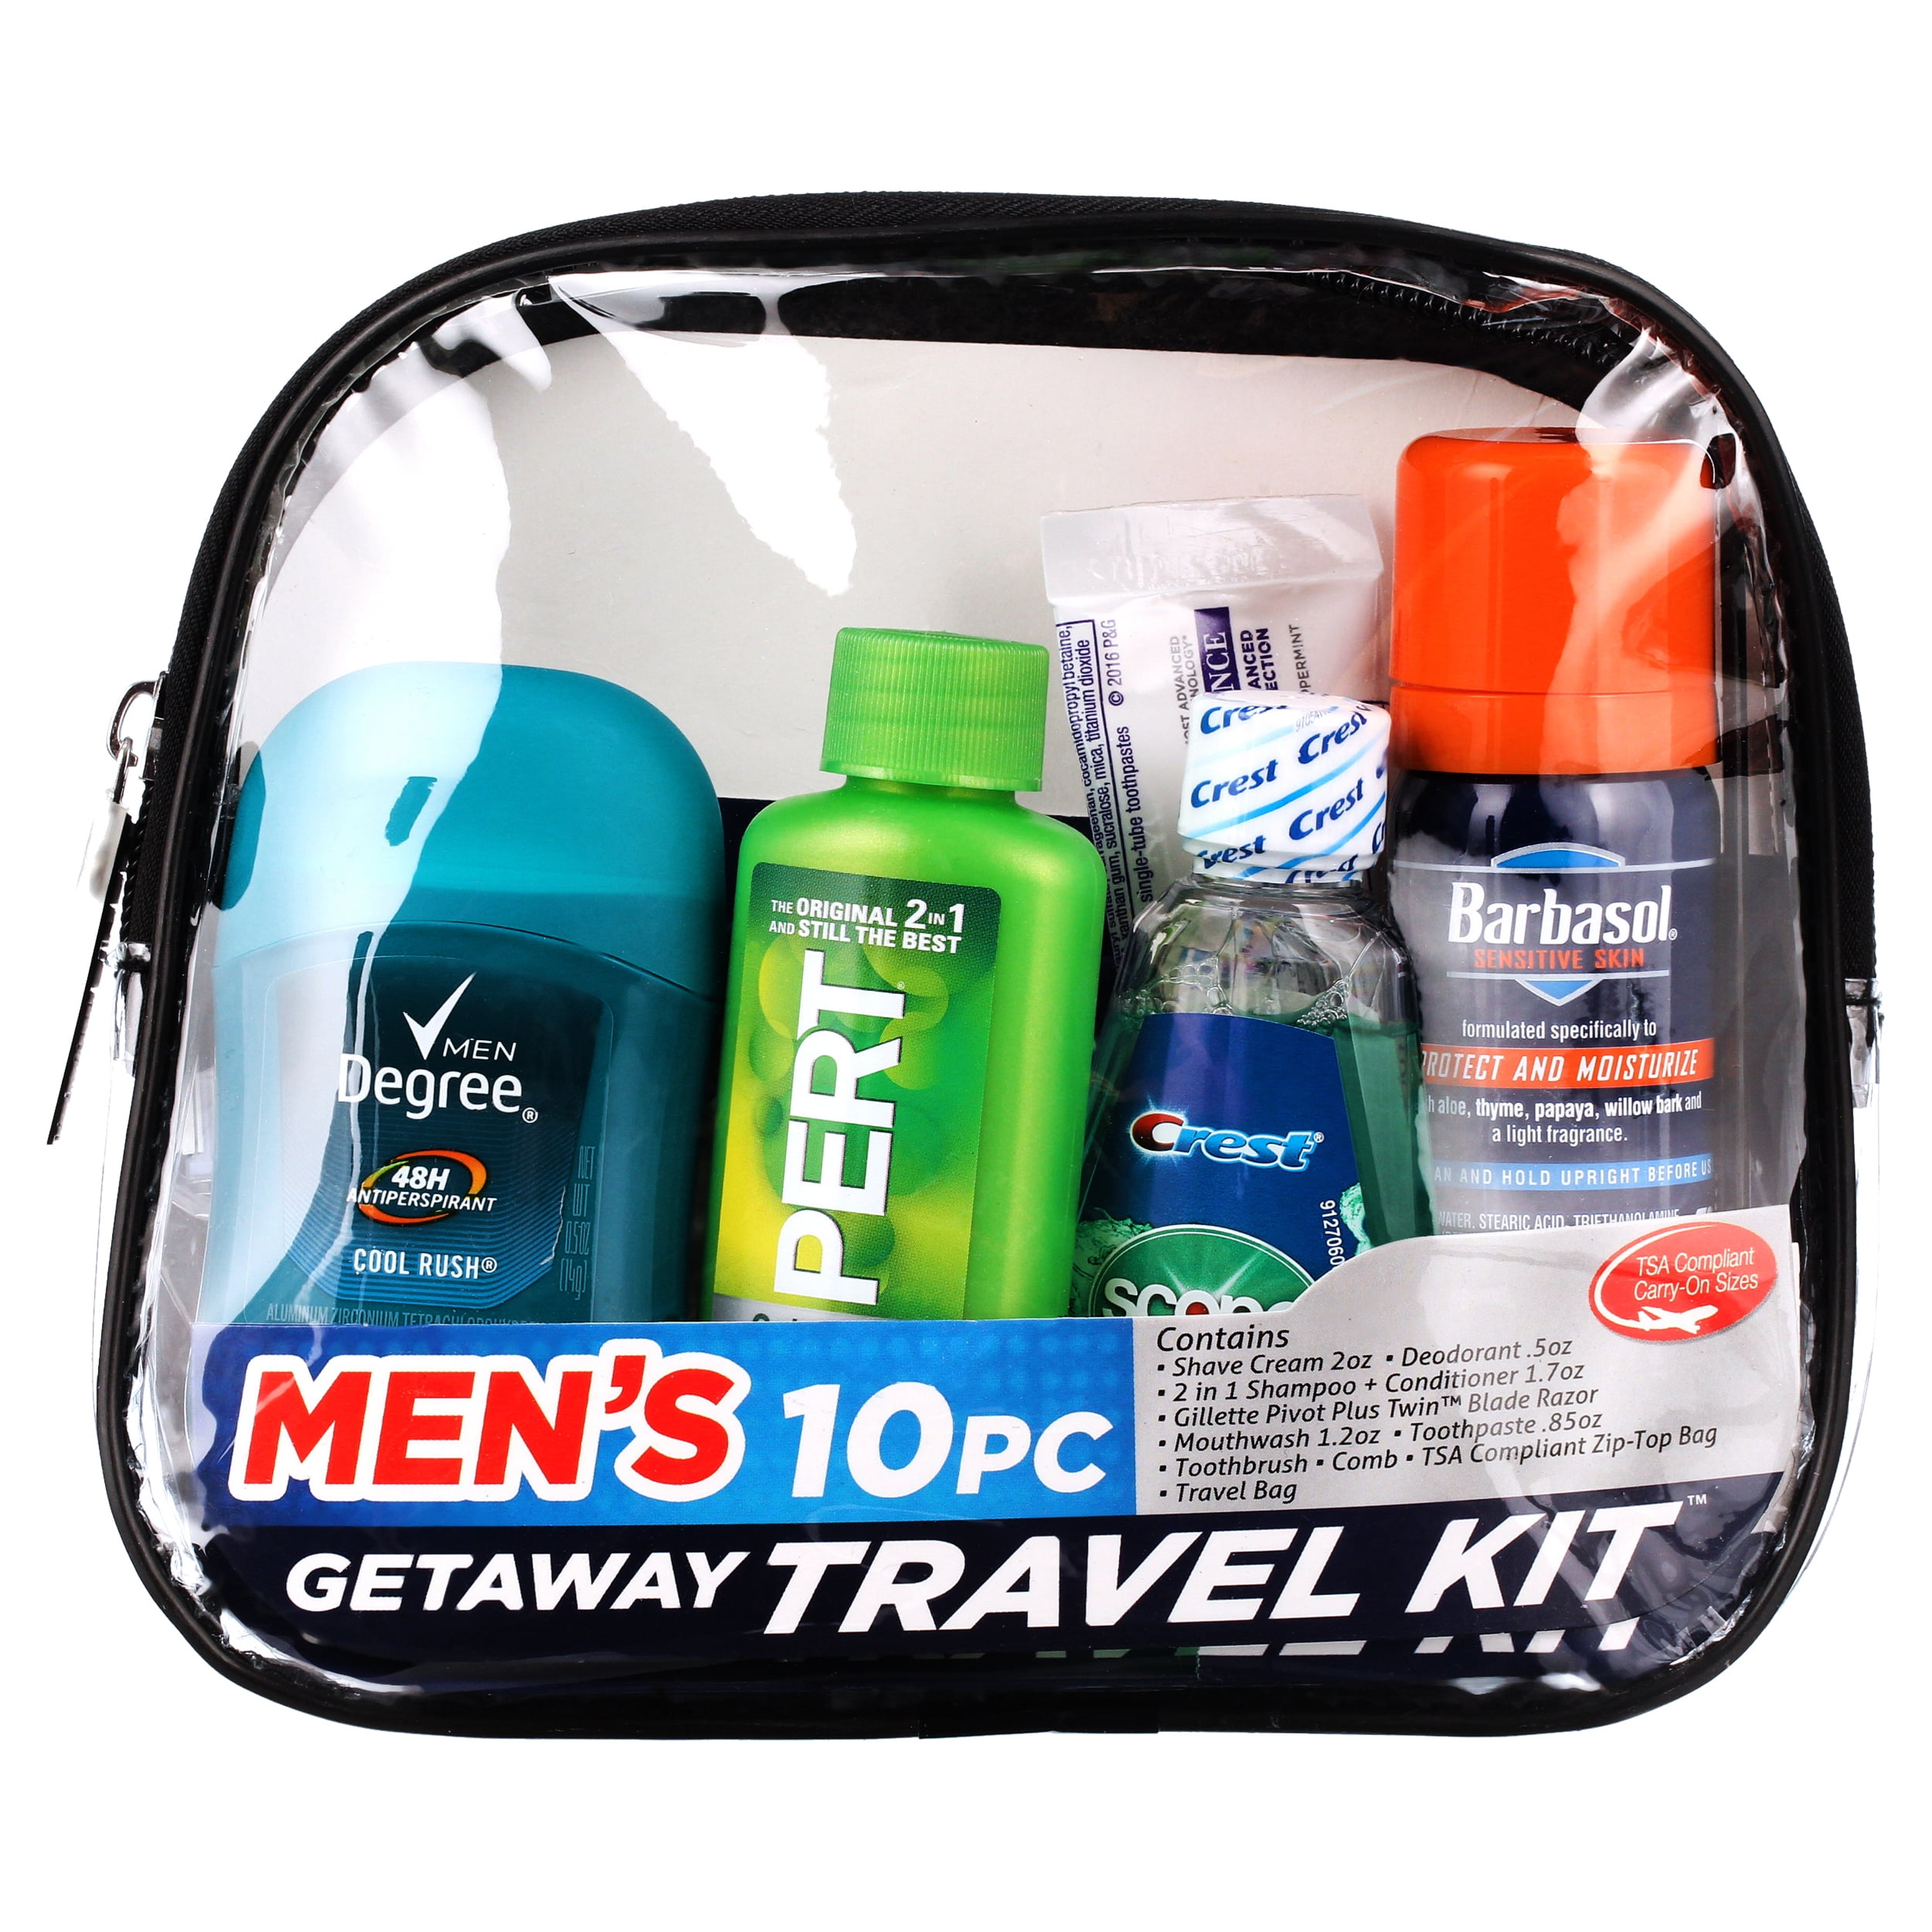 BNWT! Men's Essential Toiletry/Travel Kit! Includes 9 Items & Bag (With Bag  10)